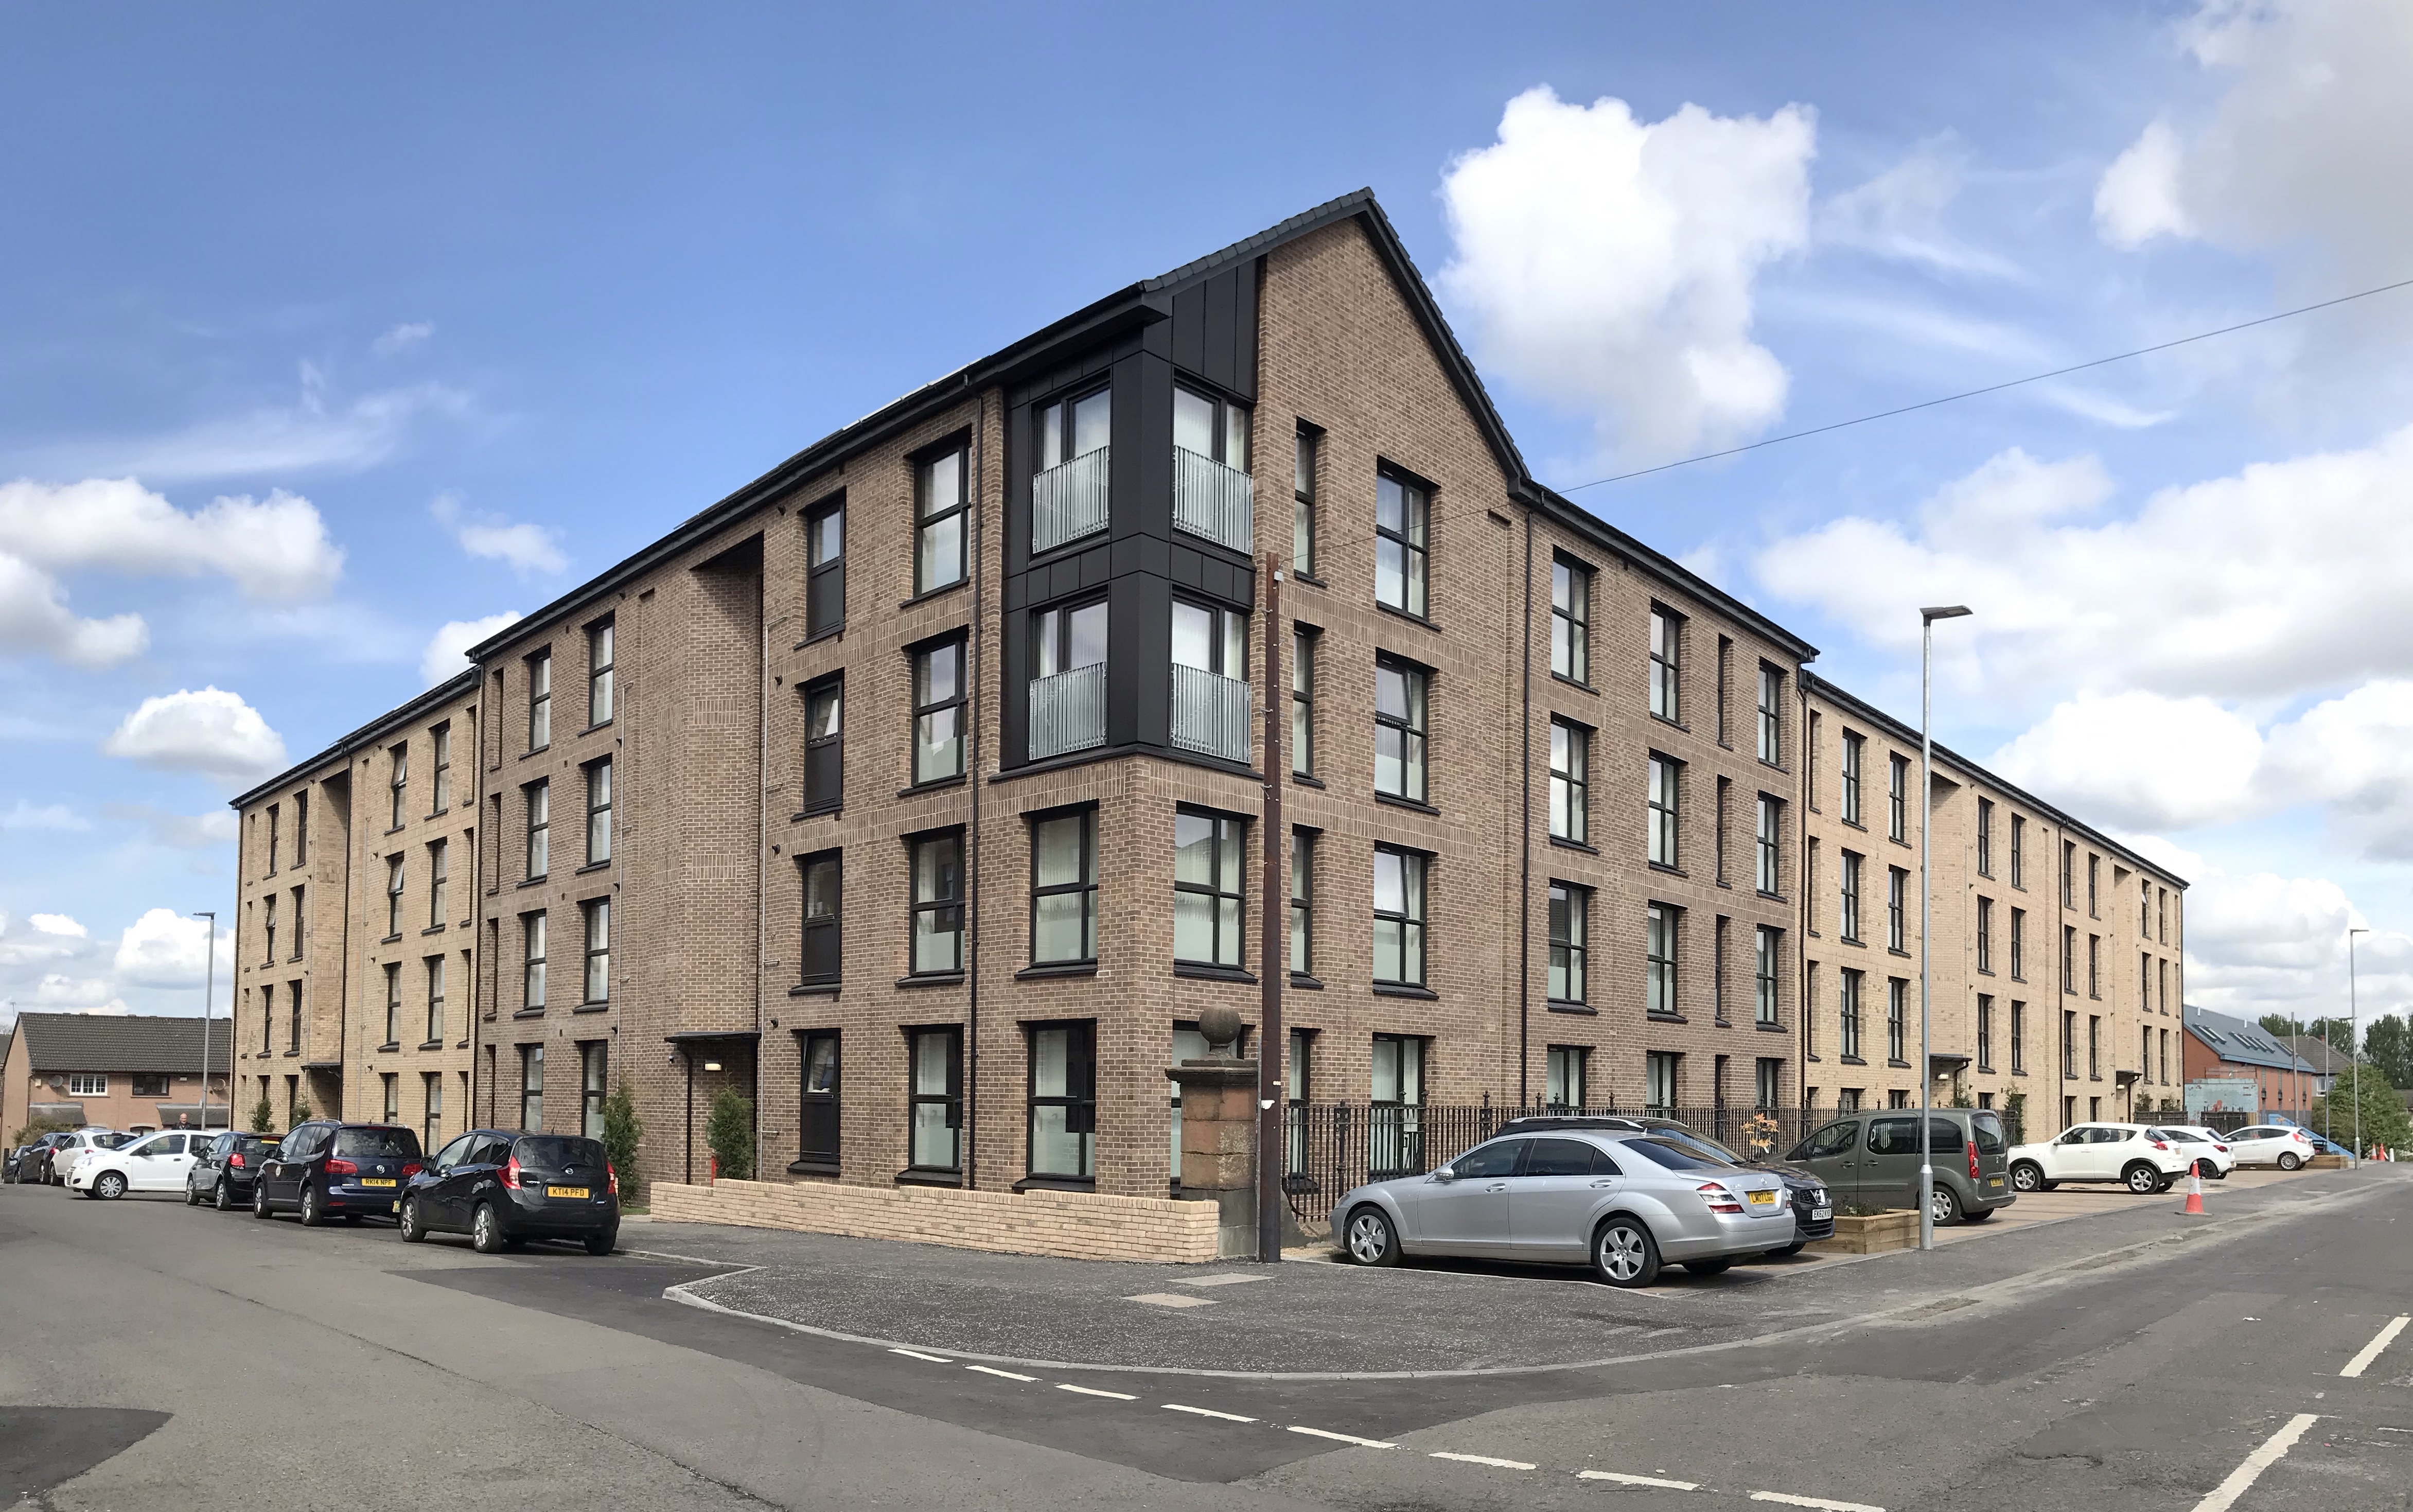 GHA delivers 45 new homes on site of former Glasgow primary school